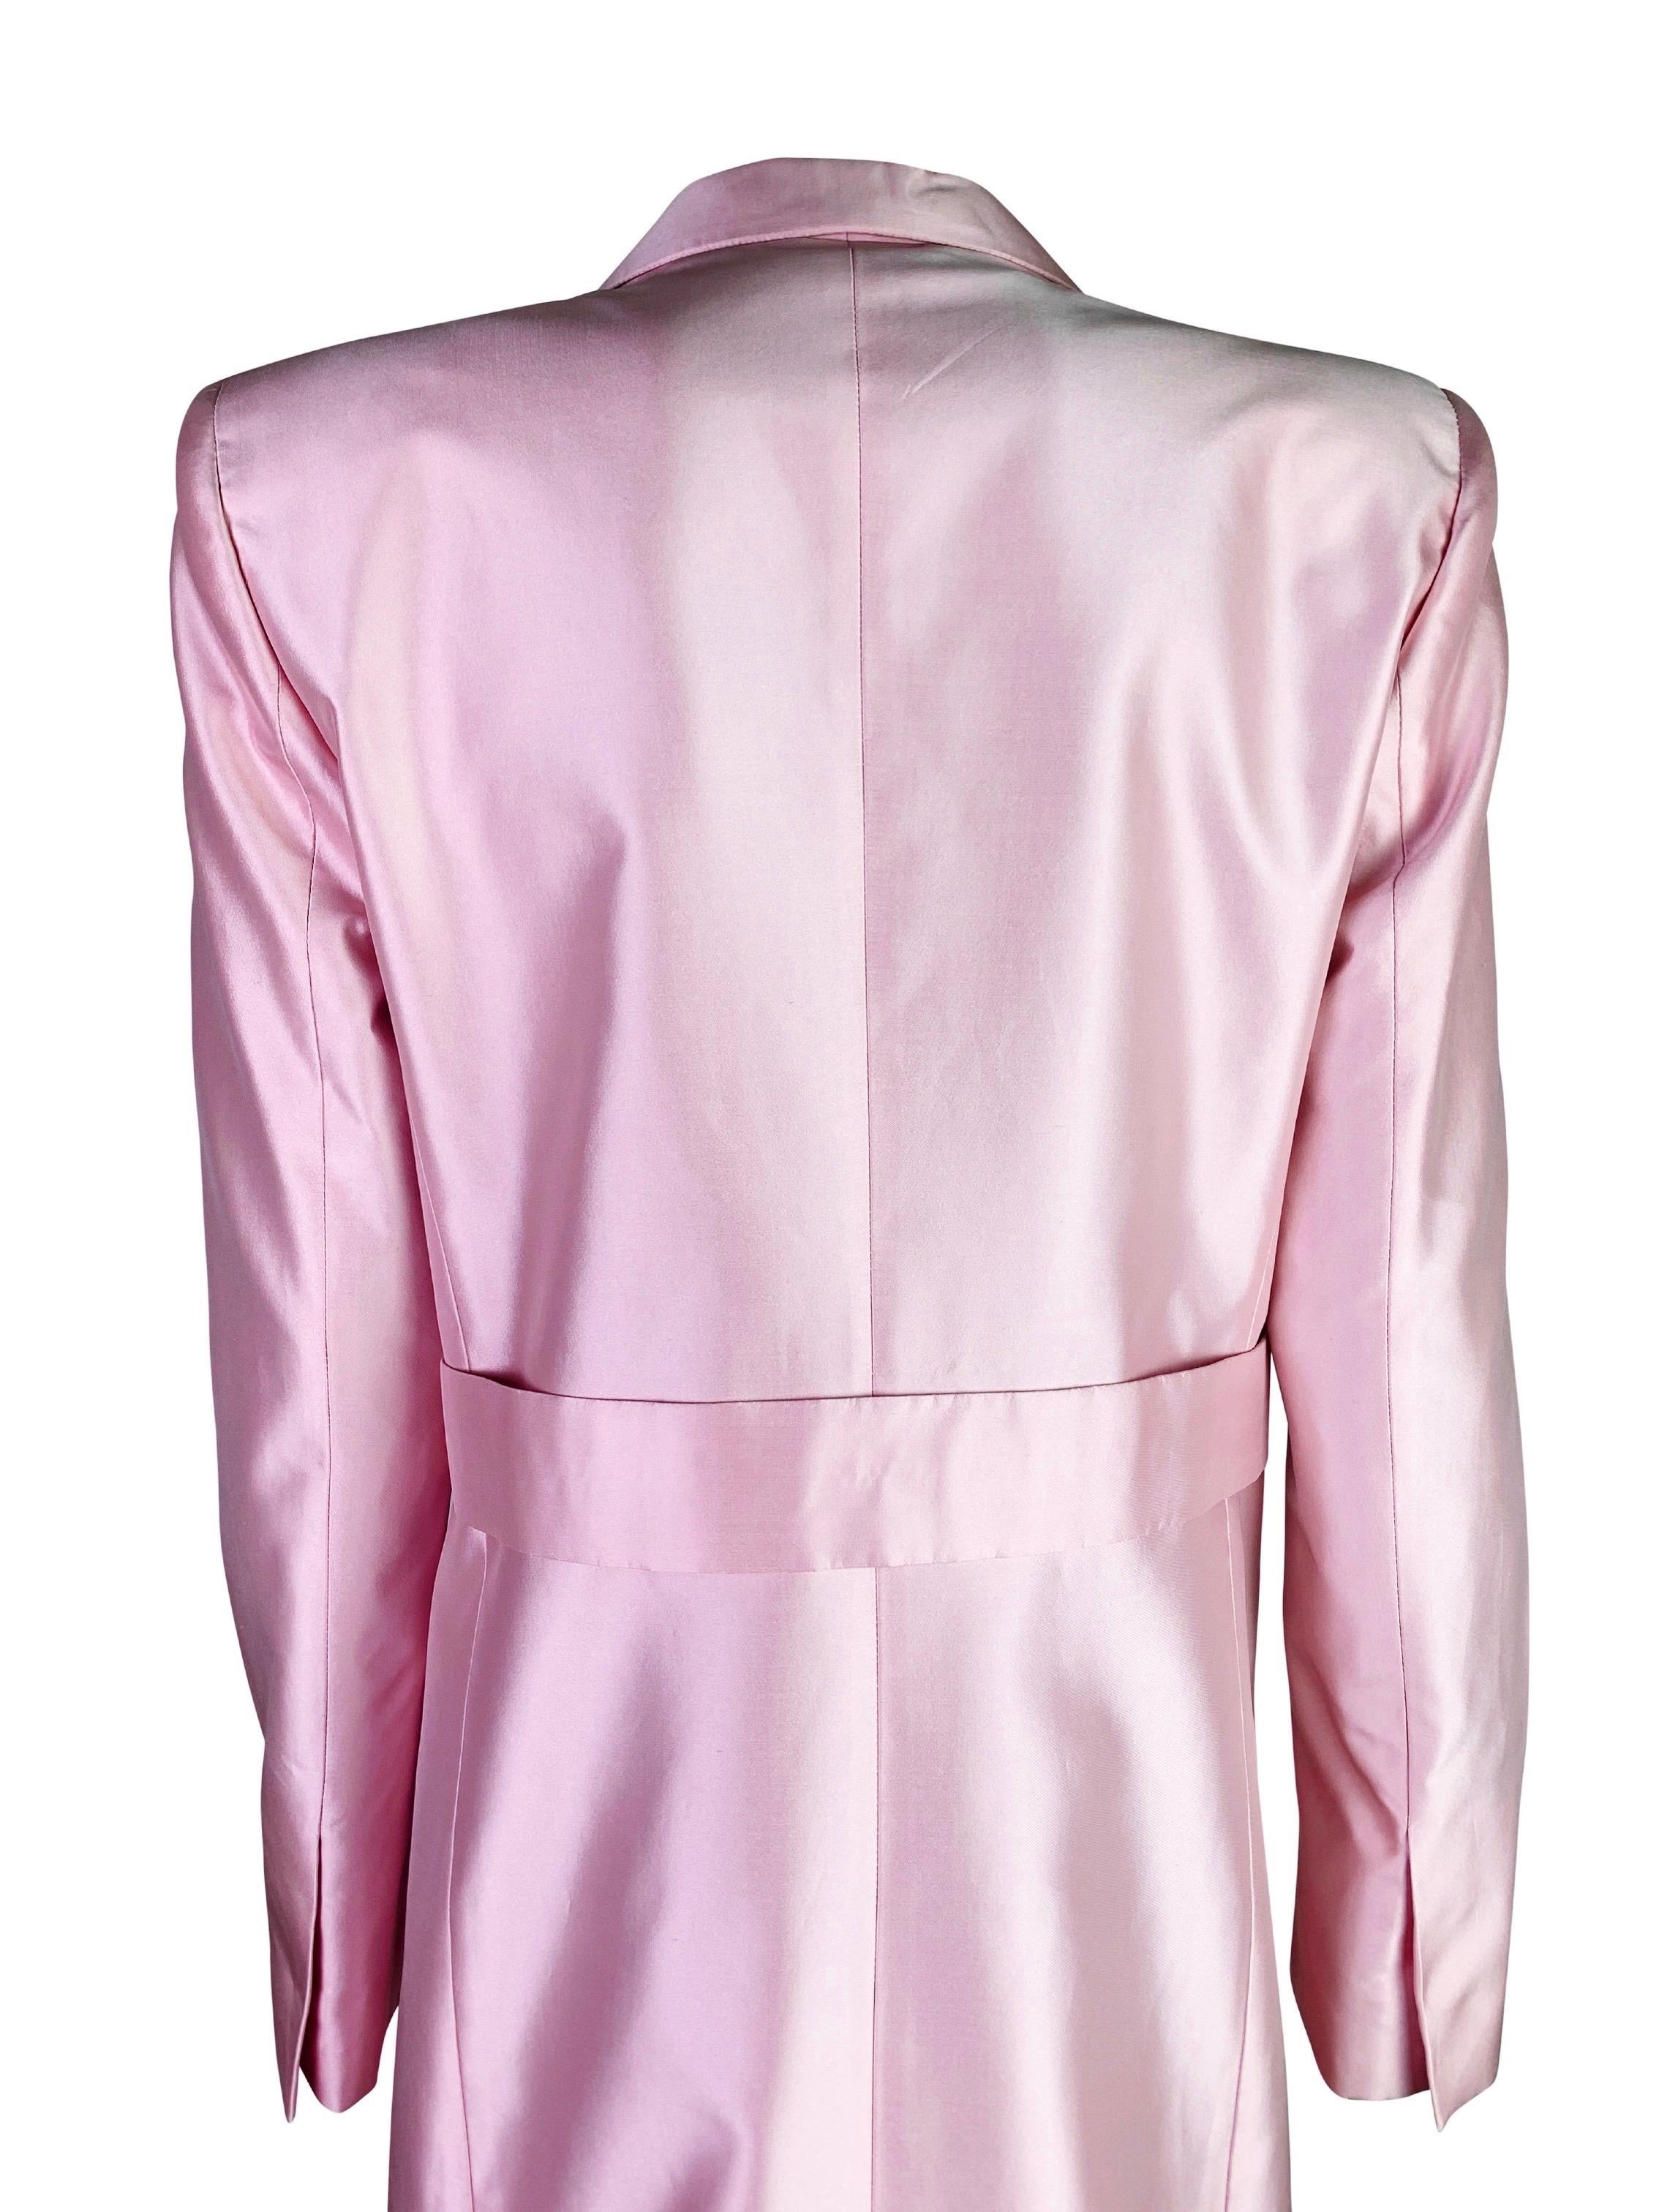 Women's Gucci Spring 1998 Silk Coat in Pink For Sale